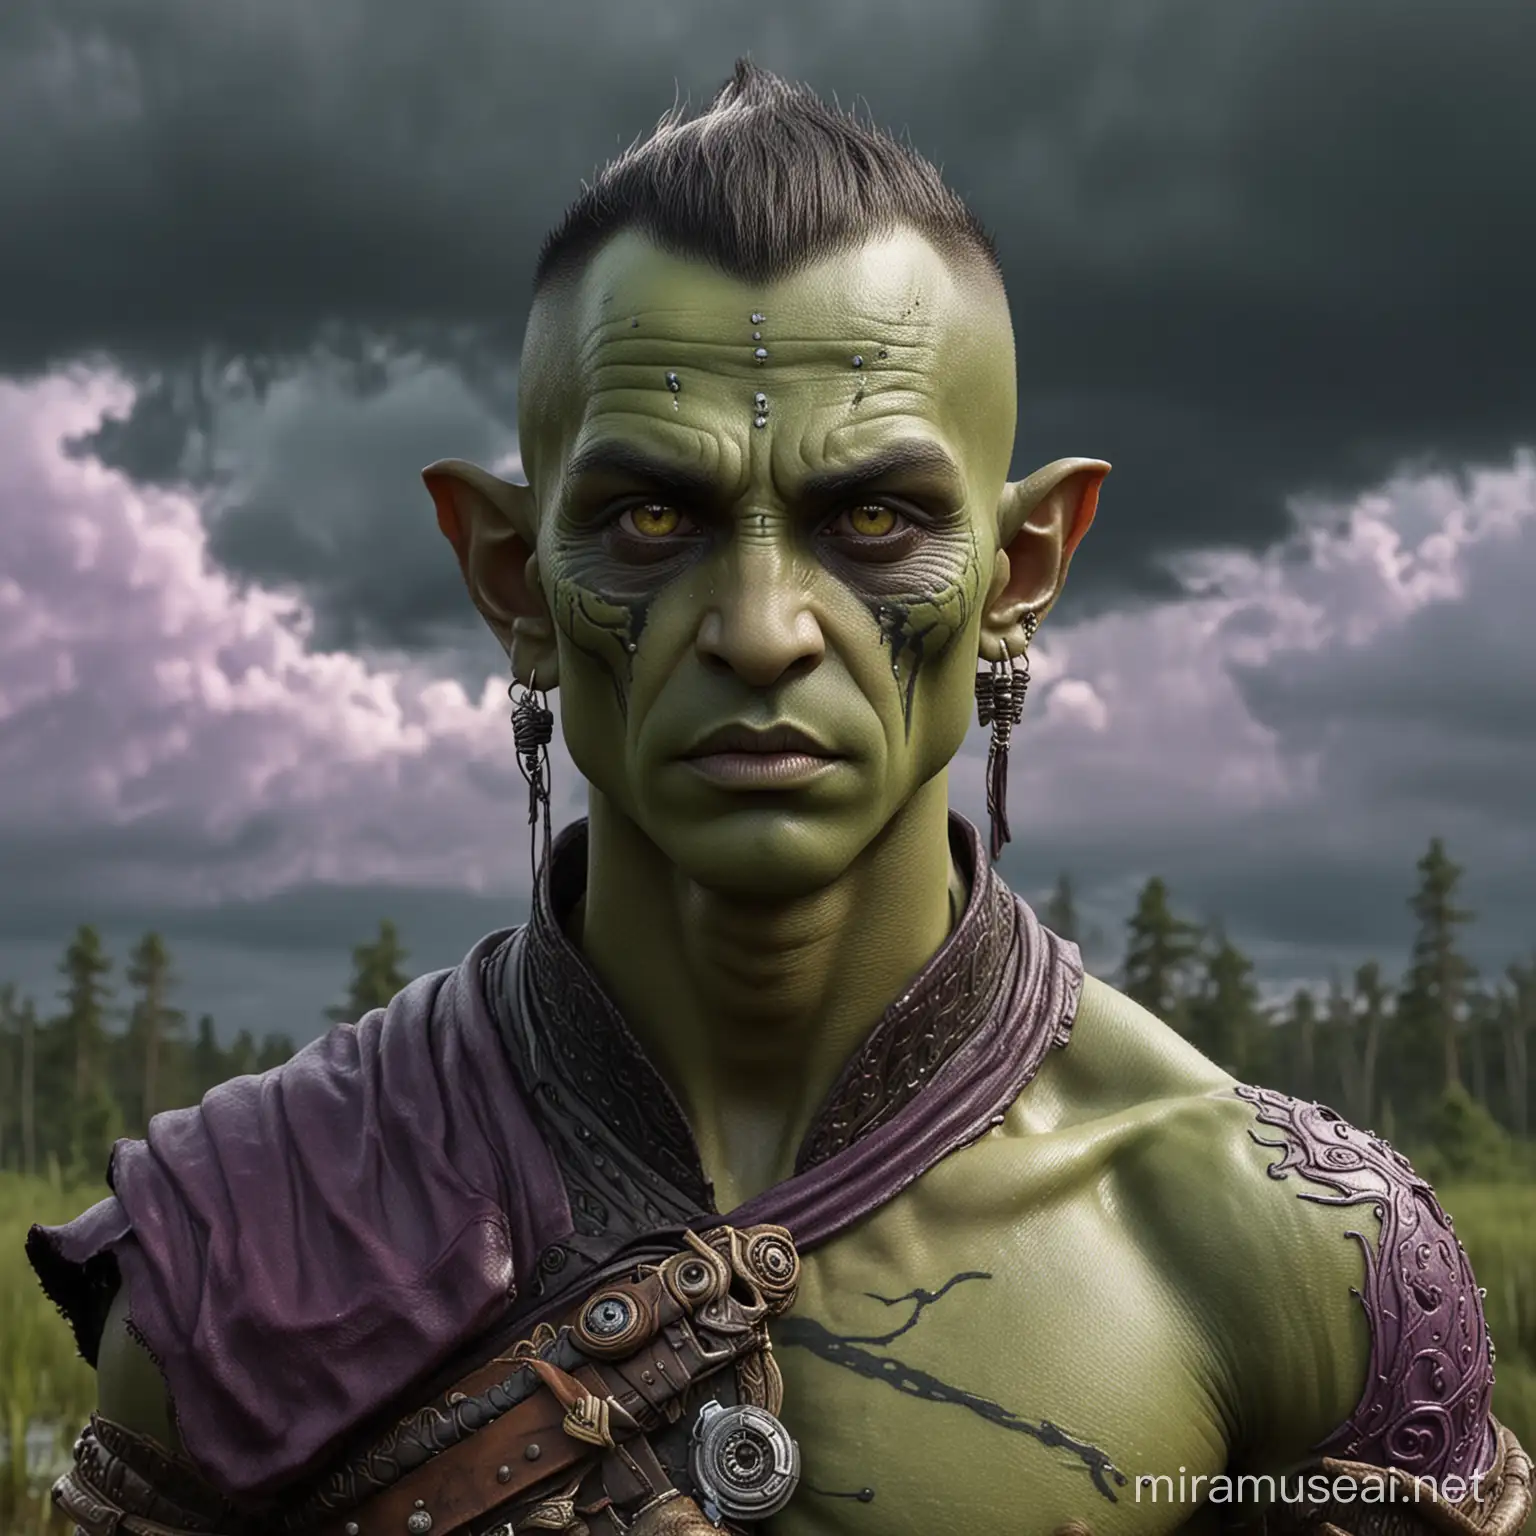 Hyperrealistic image of a tall extremely gaunt D&D style alien githyanki male monk wearing intricately detailed monistic clothing, martial arts battle stance,  yellow-green skin with many facial markings across his cheeks, flat snakelike upturned nose lays flush against his face, pointed ears held tight to his head, stringy long thin black mustache that extends to his chest, large piercing purple eyes, long thin fingers, in the background is a surreal multi-colored forested swamp, ominous grey and green clouds are in a dark sky. 